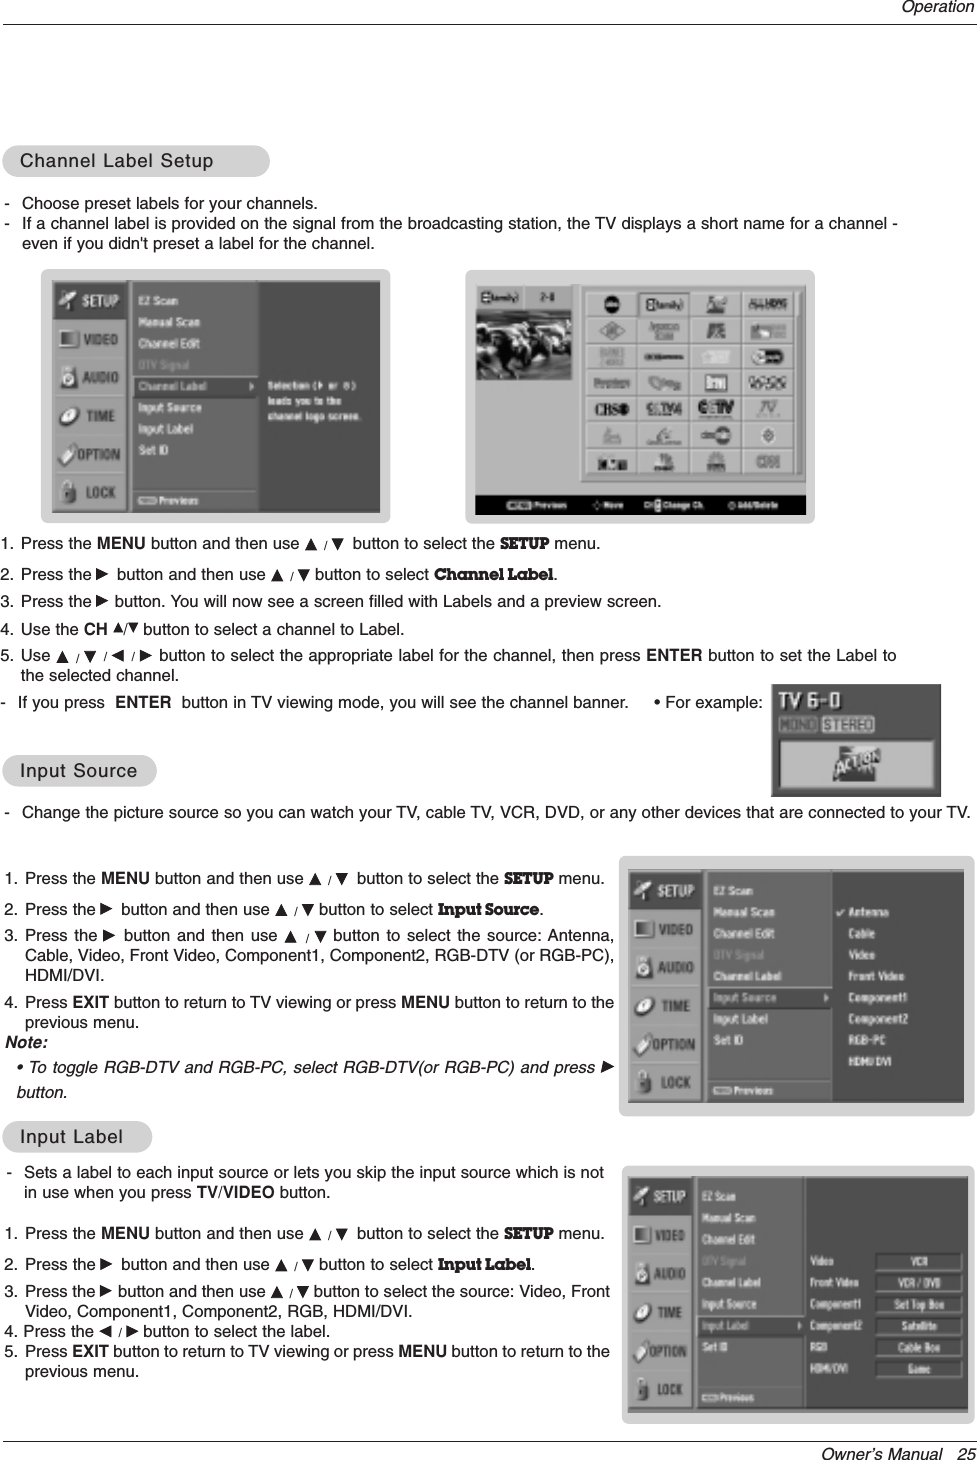 Owner’s Manual   25Operation- Change the picture source so you can watch your TV, cable TV, VCR, DVD, or any other devices that are connected to your TV. 1. Press the MENU button and then use D / Ebutton to select the SETUP menu.2. Press the Gbutton and then use D / Ebutton to select Input Source.3. Press the Gbutton and then use D  /  Ebutton to select the source: Antenna,Cable, Video, Front Video, Component1, Component2, RGB-DTV (or RGB-PC),HDMI/DVI.4. Press EXIT button to return to TV viewing or press MENU button to return to theprevious menu.Note:• To toggle RGB-DTV and RGB-PC, select RGB-DTV(or RGB-PC) and press Gbutton.Input SourceInput Source1. Press the MENU button and then use D / Ebutton to select the SETUP menu.2. Press the Gbutton and then use D / Ebutton to select Input Label.3. Press the Gbutton and then use D / Ebutton to select the source: Video, FrontVideo, Component1, Component2, RGB, HDMI/DVI.4. Press the F / Gbutton to select the label.5. Press EXIT button to return to TV viewing or press MENU button to return to theprevious menu.Input LabelInput Label- Choose preset labels for your channels. - If a channel label is provided on the signal from the broadcasting station, the TV displays a short name for a channel -even if you didn&apos;t preset a label for the channel.1. Press the MENU button and then use D / Ebutton to select the SETUP menu.2. Press the Gbutton and then use D / Ebutton to select Channel Label.3. Press the Gbutton. You will now see a screen filled with Labels and a preview screen.4. Use the CH D/Ebutton to select a channel to Label. 5. Use D  / E/ F / G button to select the appropriate label for the channel, then press ENTER button to set the Label tothe selected channel.- If you press  ENTER button in TV viewing mode, you will see the channel banner.     • For example:Channel Label SetupChannel Label Setup- Sets a label to each input source or lets you skip the input source which is notin use when you press TV/VIDEO button. 